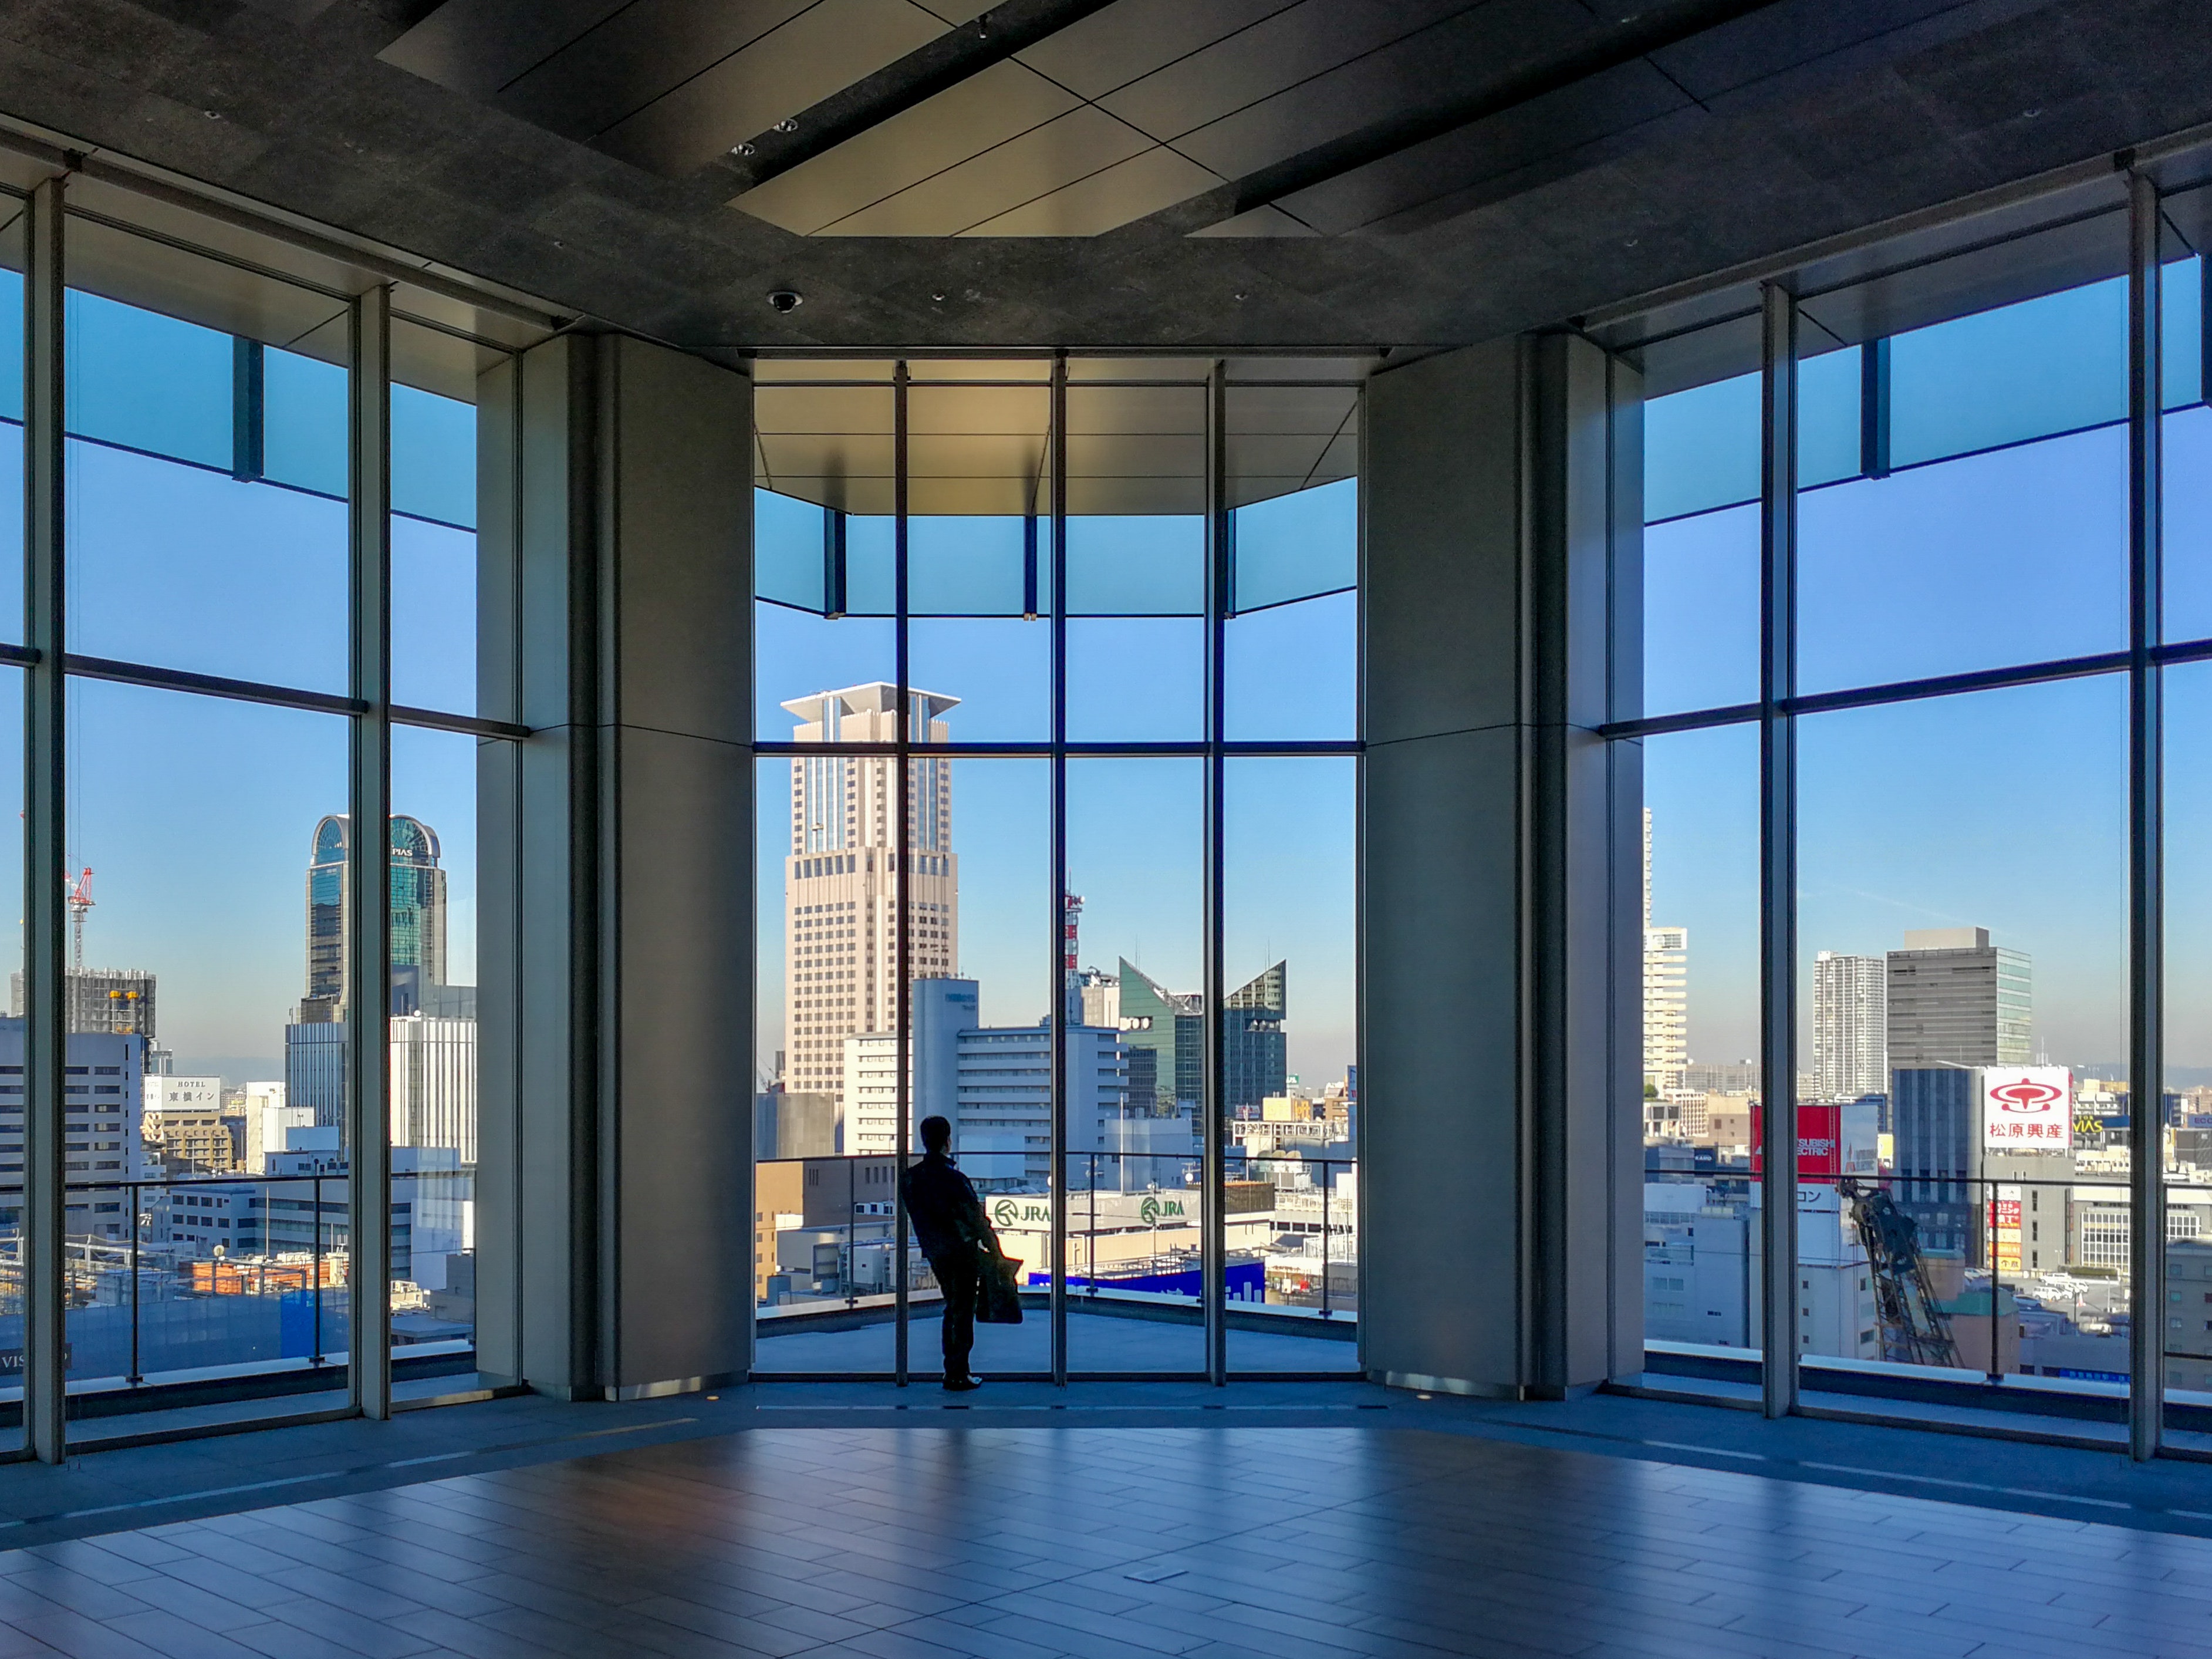 Person Inside Clear Glass Room, Architecture, Blue sky, Buildings, Ceiling, HQ Photo